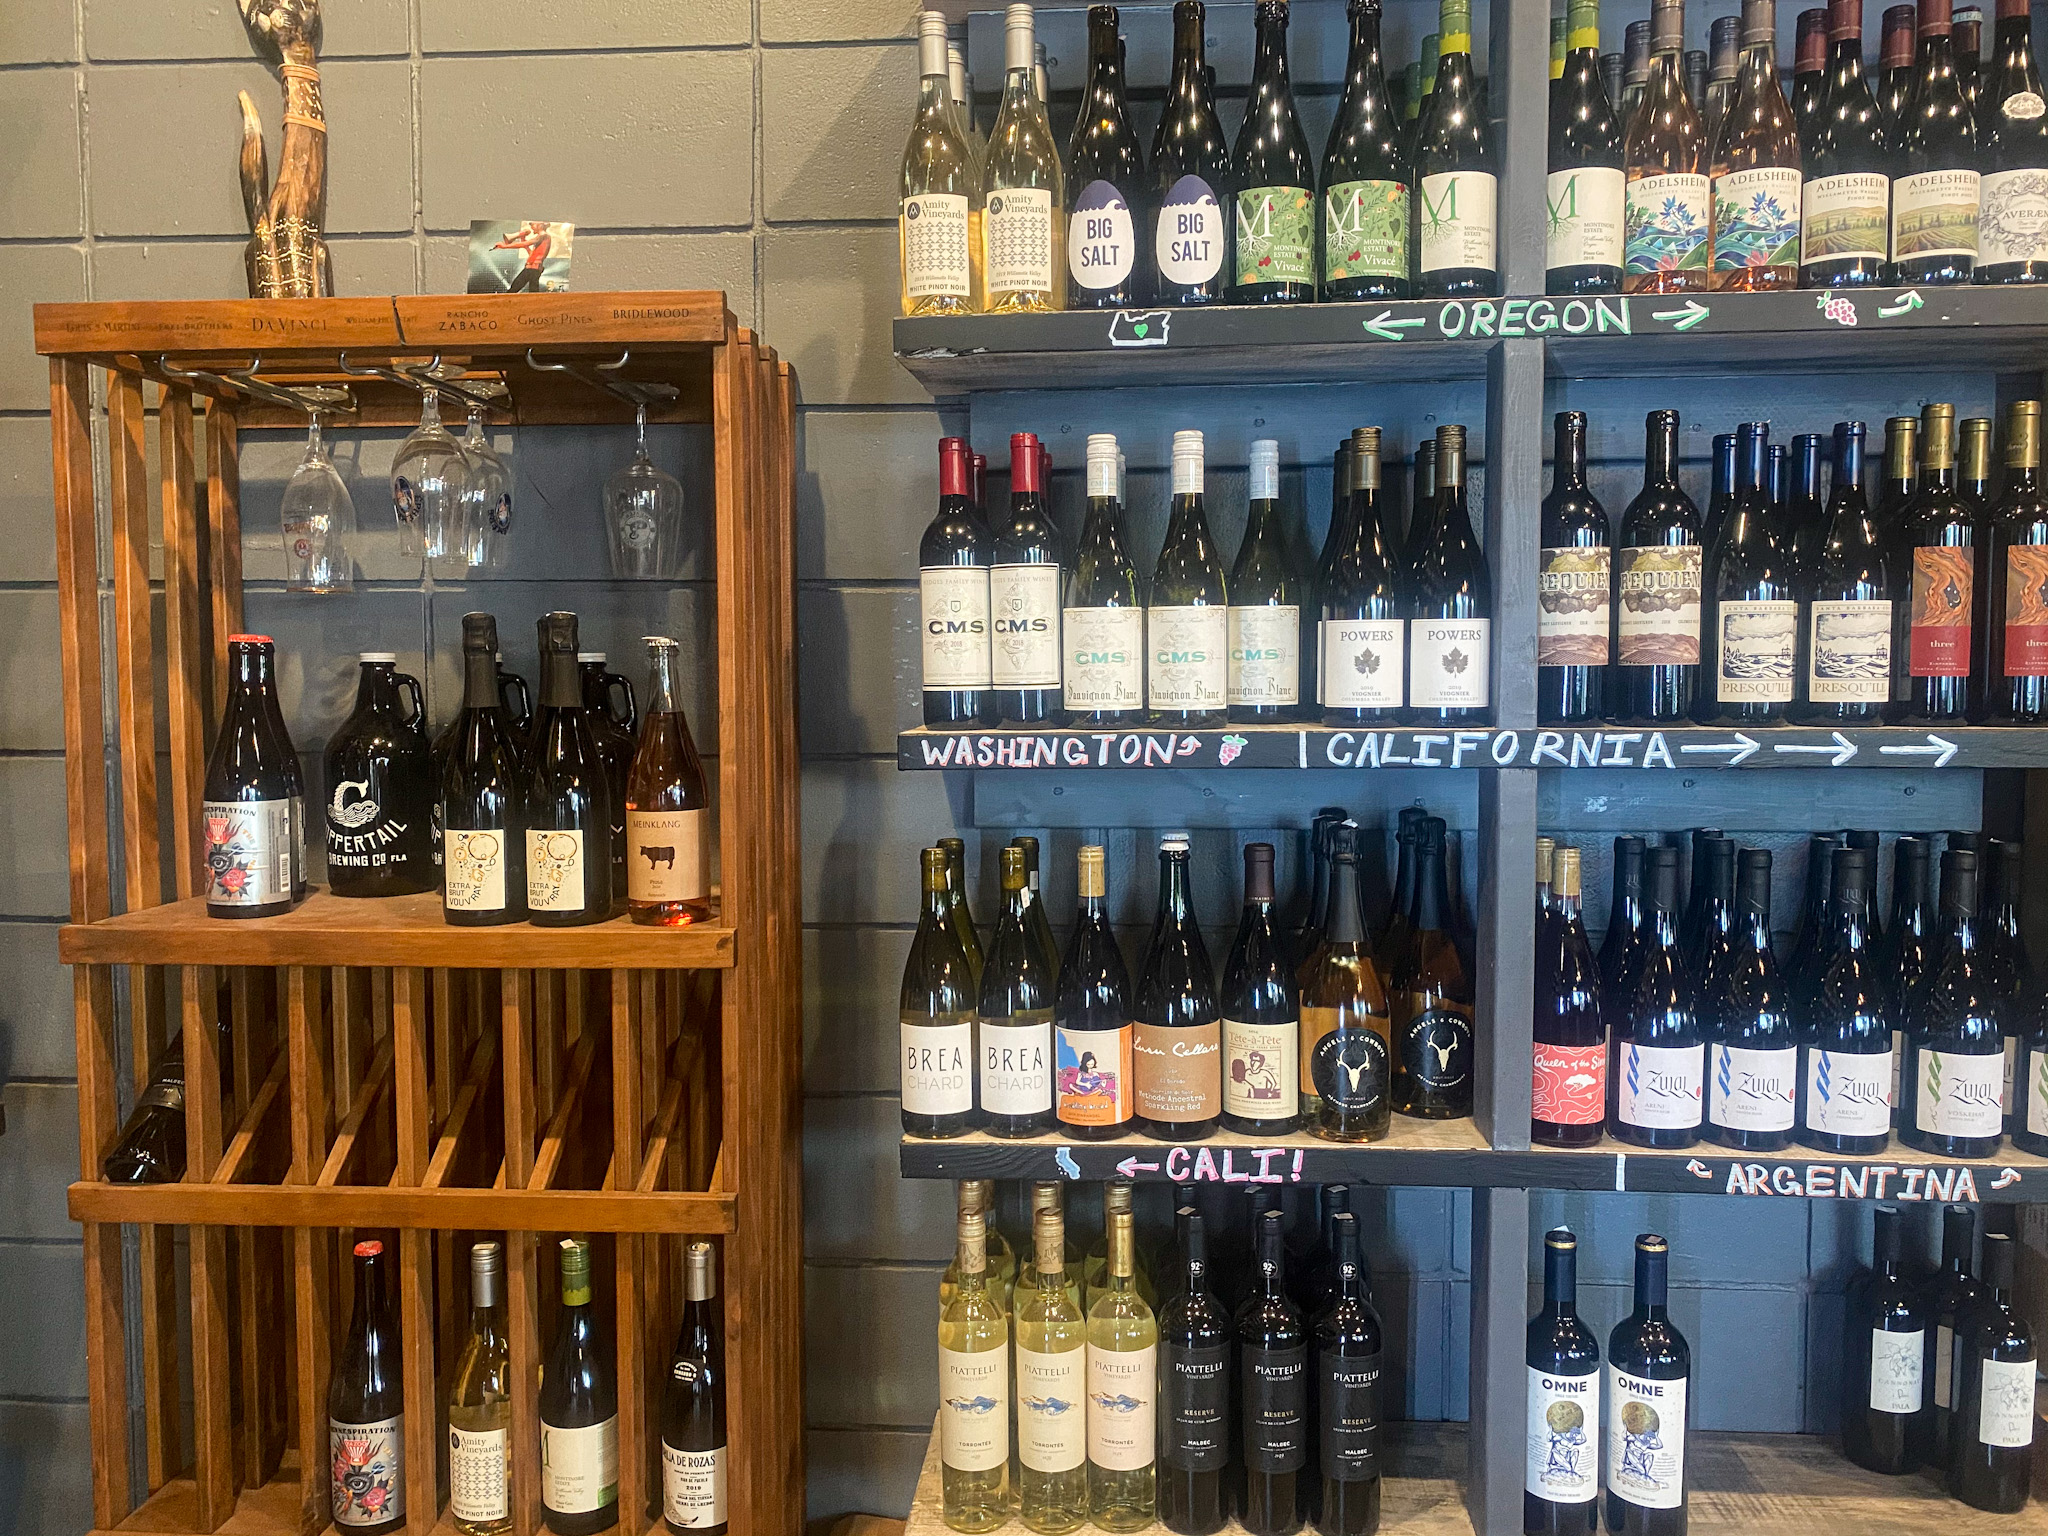 A glimpse at the retail wine selection